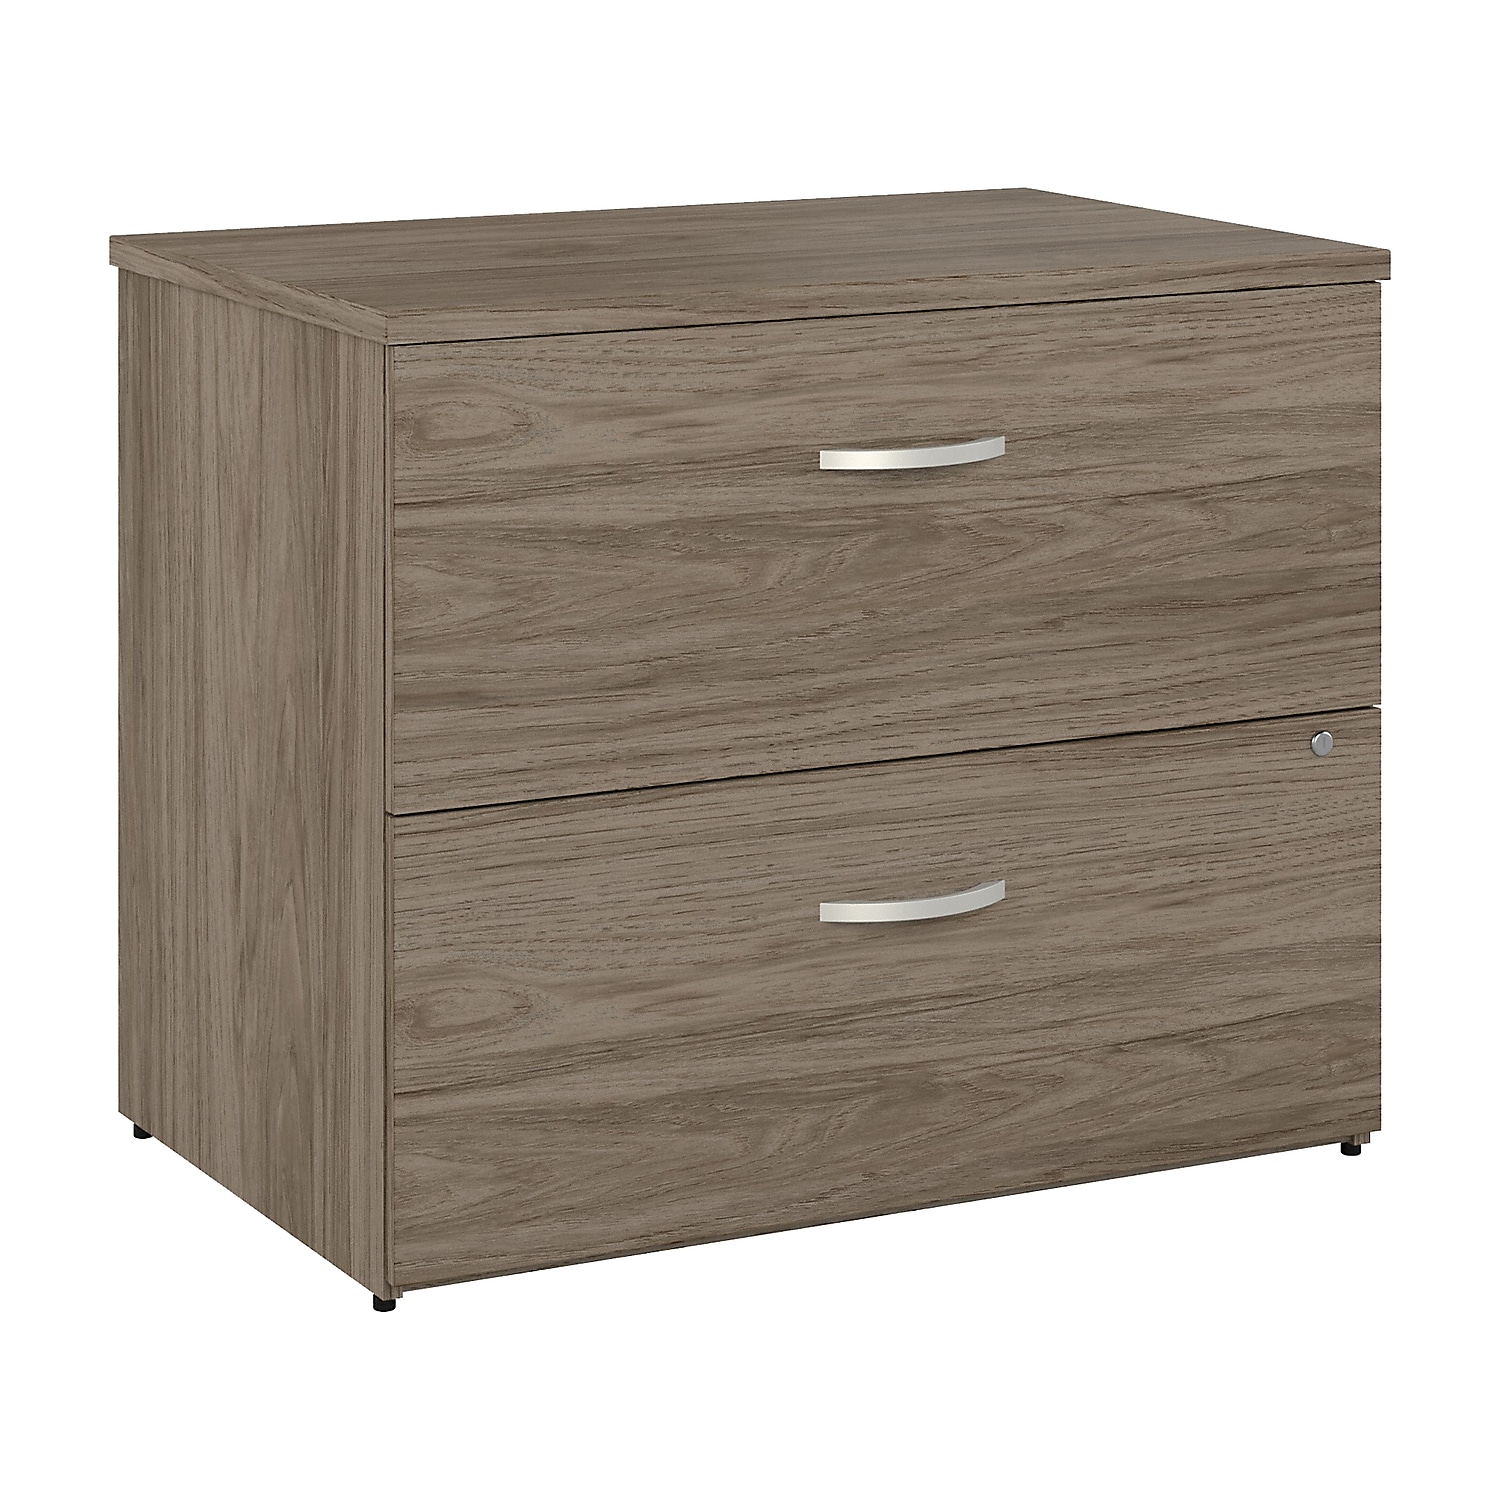 Hybrid 2 Drawer Lateral File Cabinet in Modern Hickory - Engineered Wood - image 1 of 8